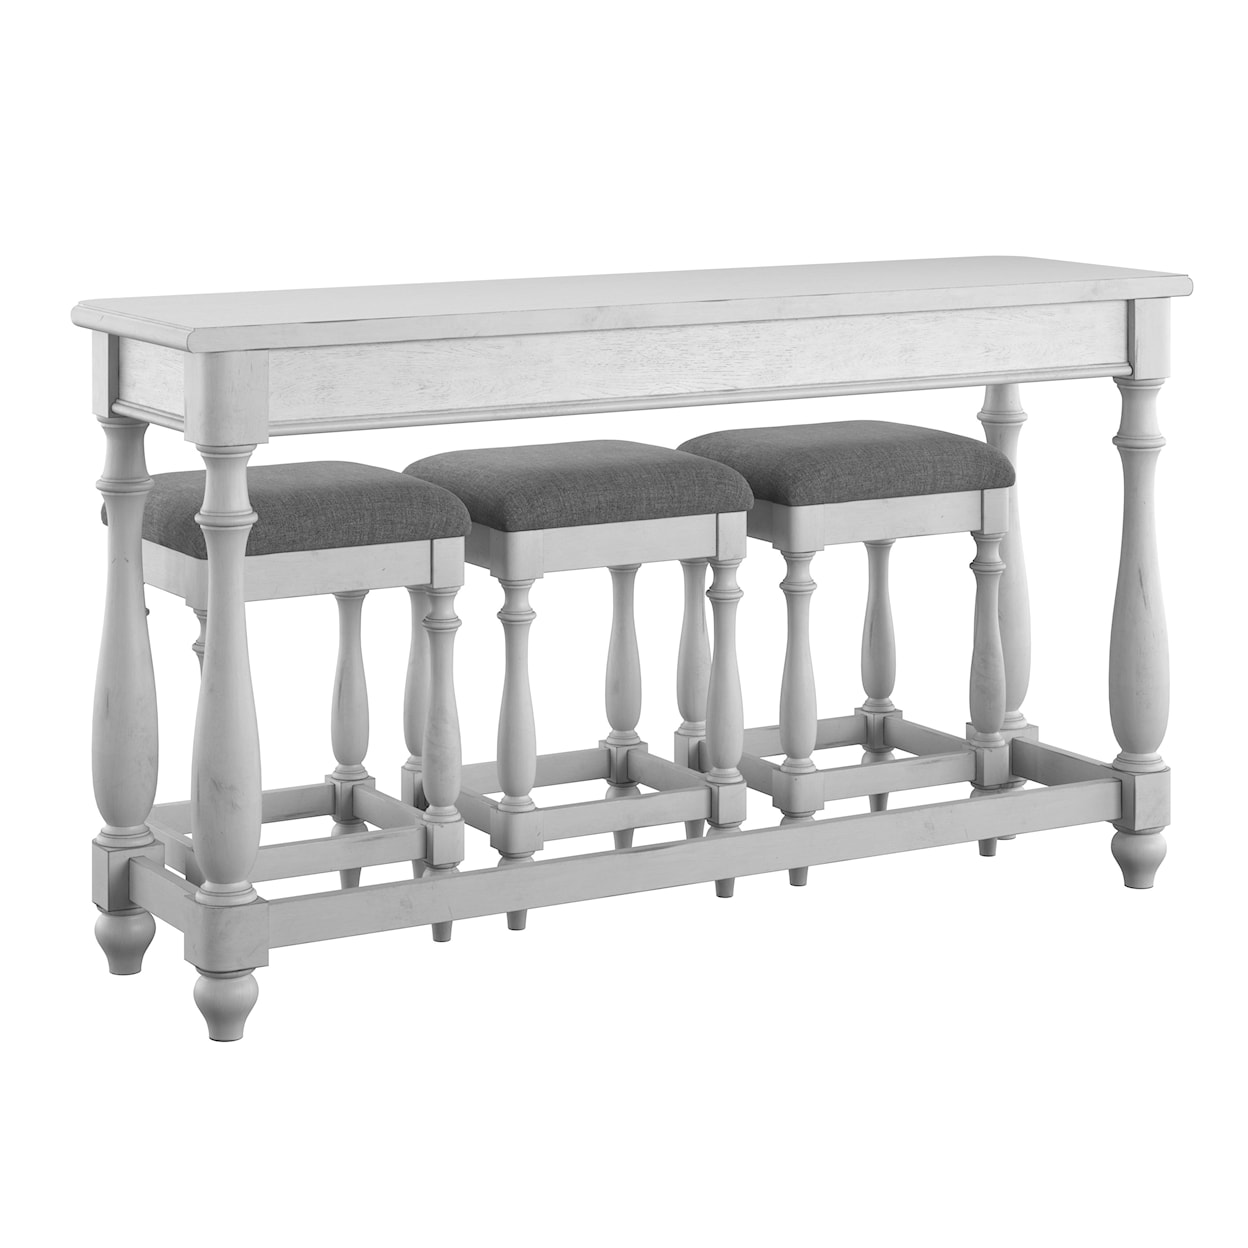 Emerald New Haven Sofa Table With Three Stools